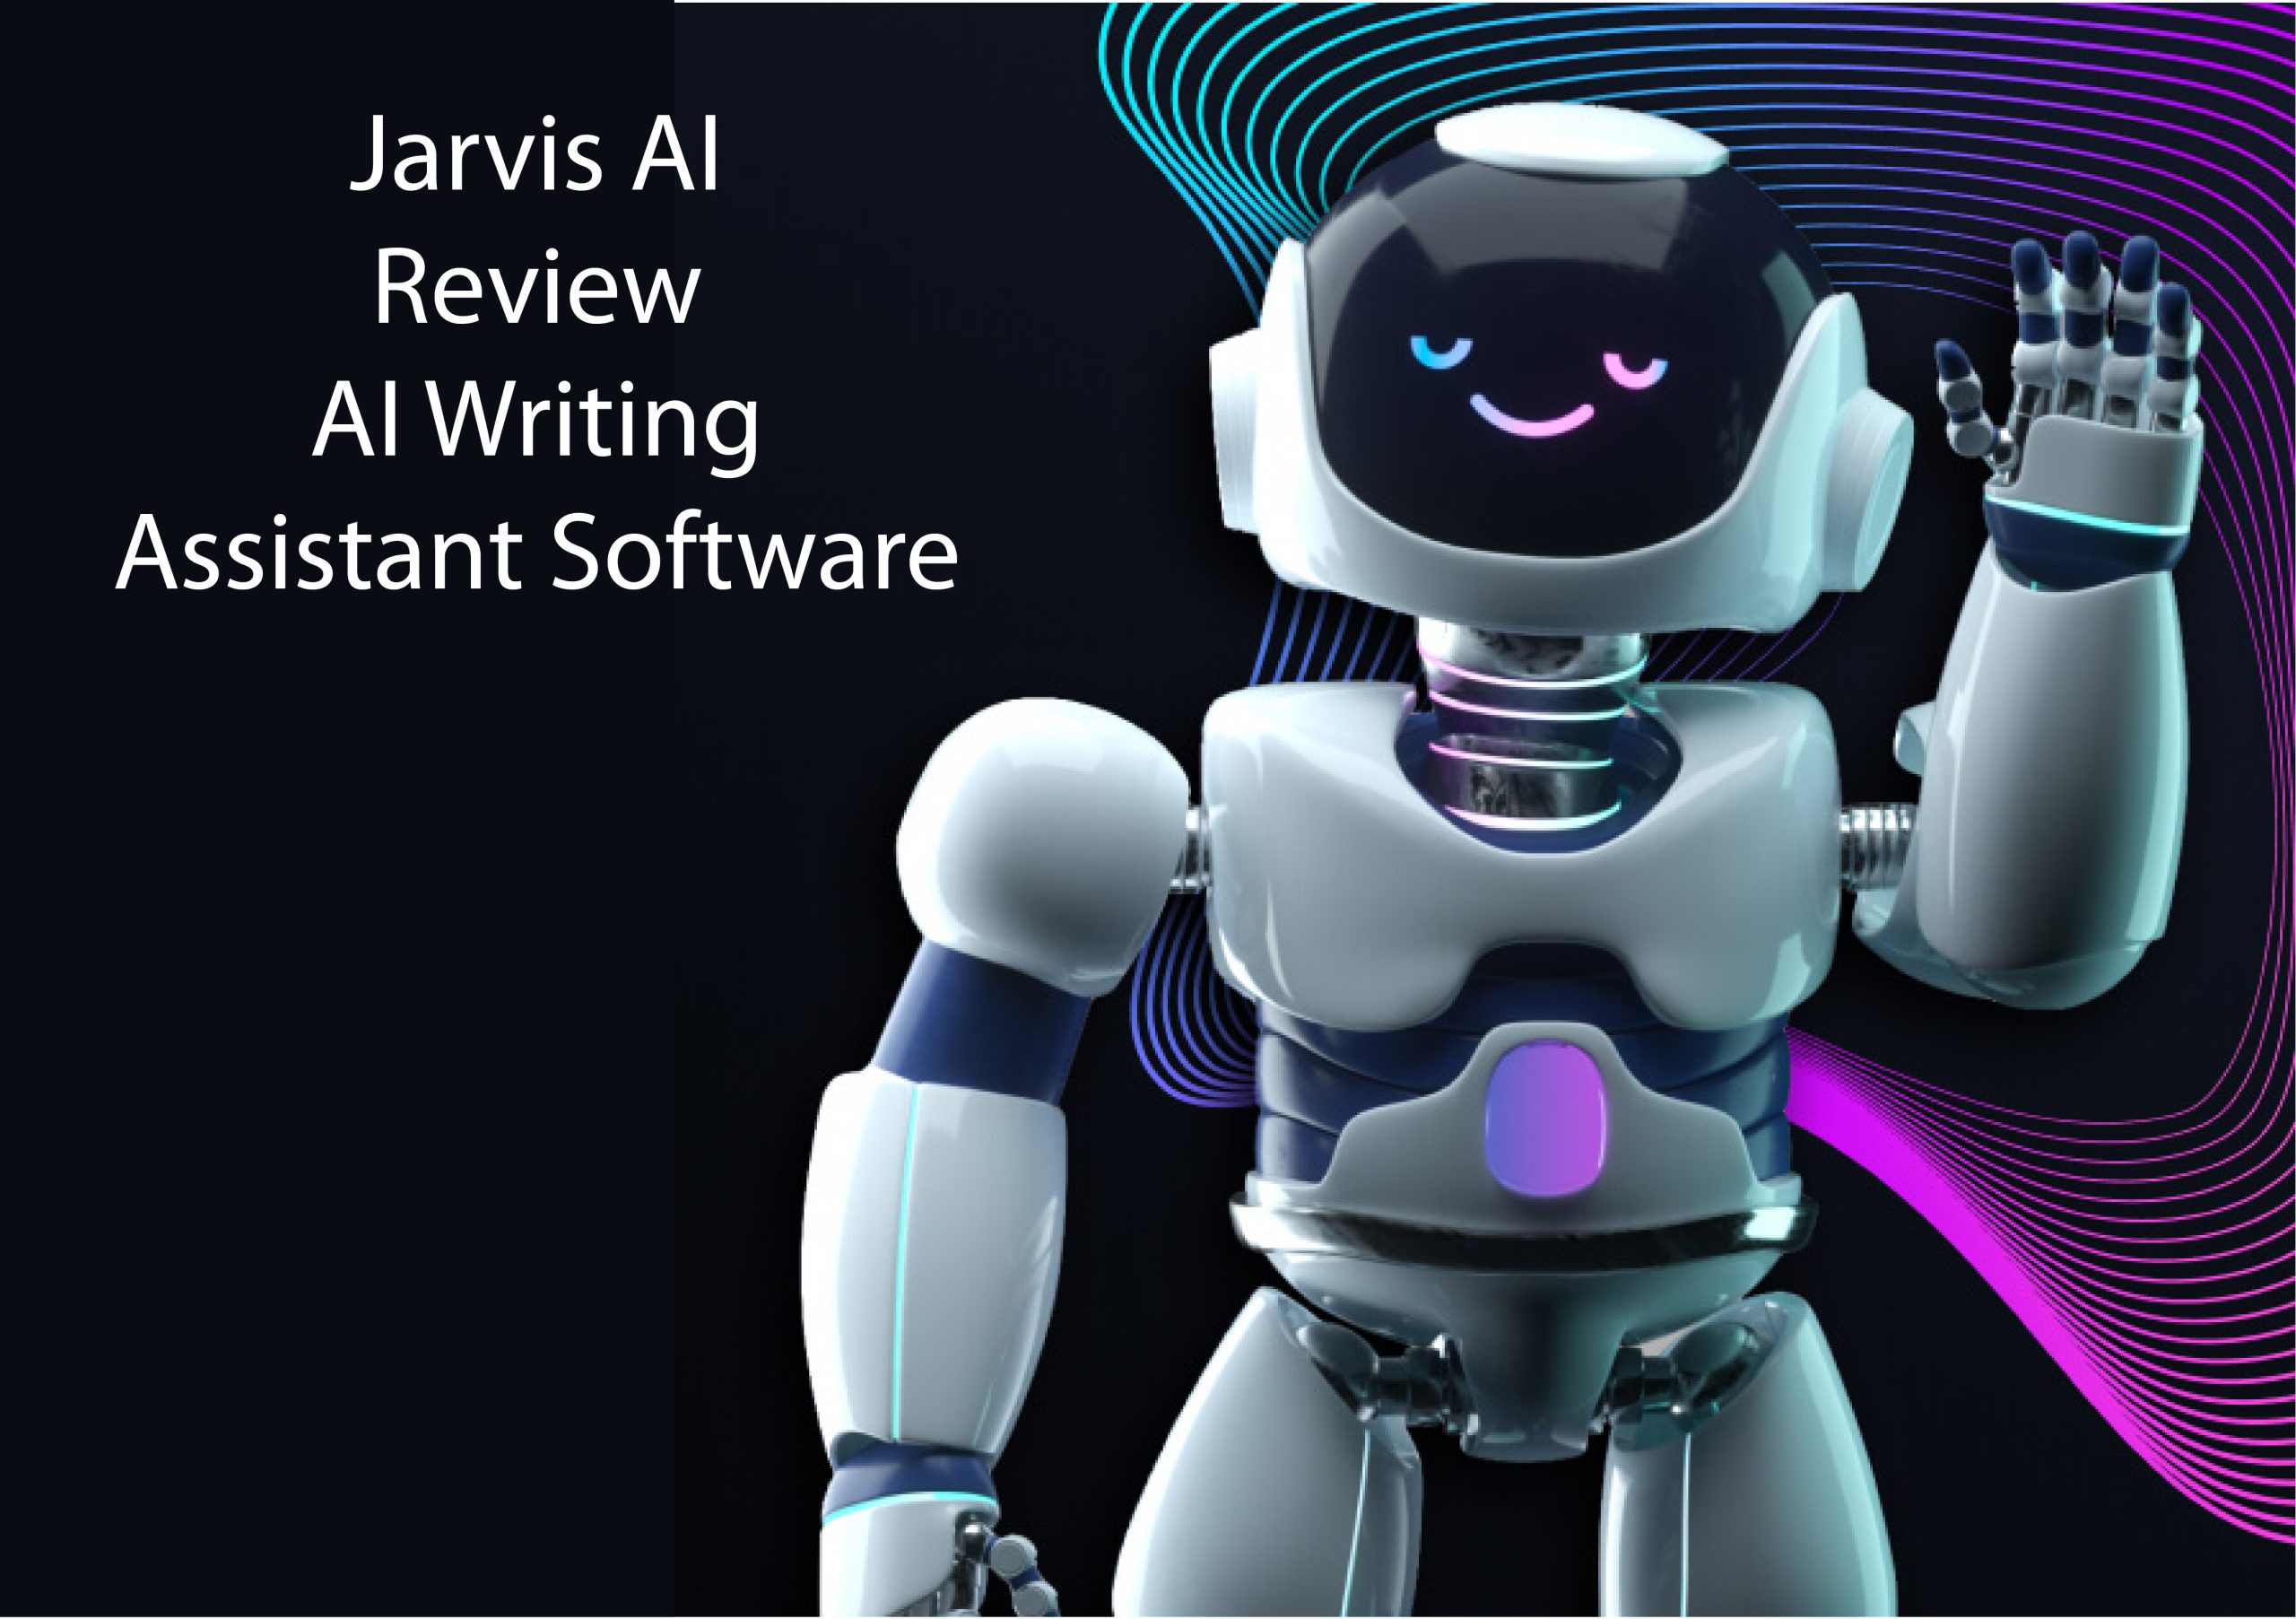 Jarvis AI Review – AI Writing Assistant Software